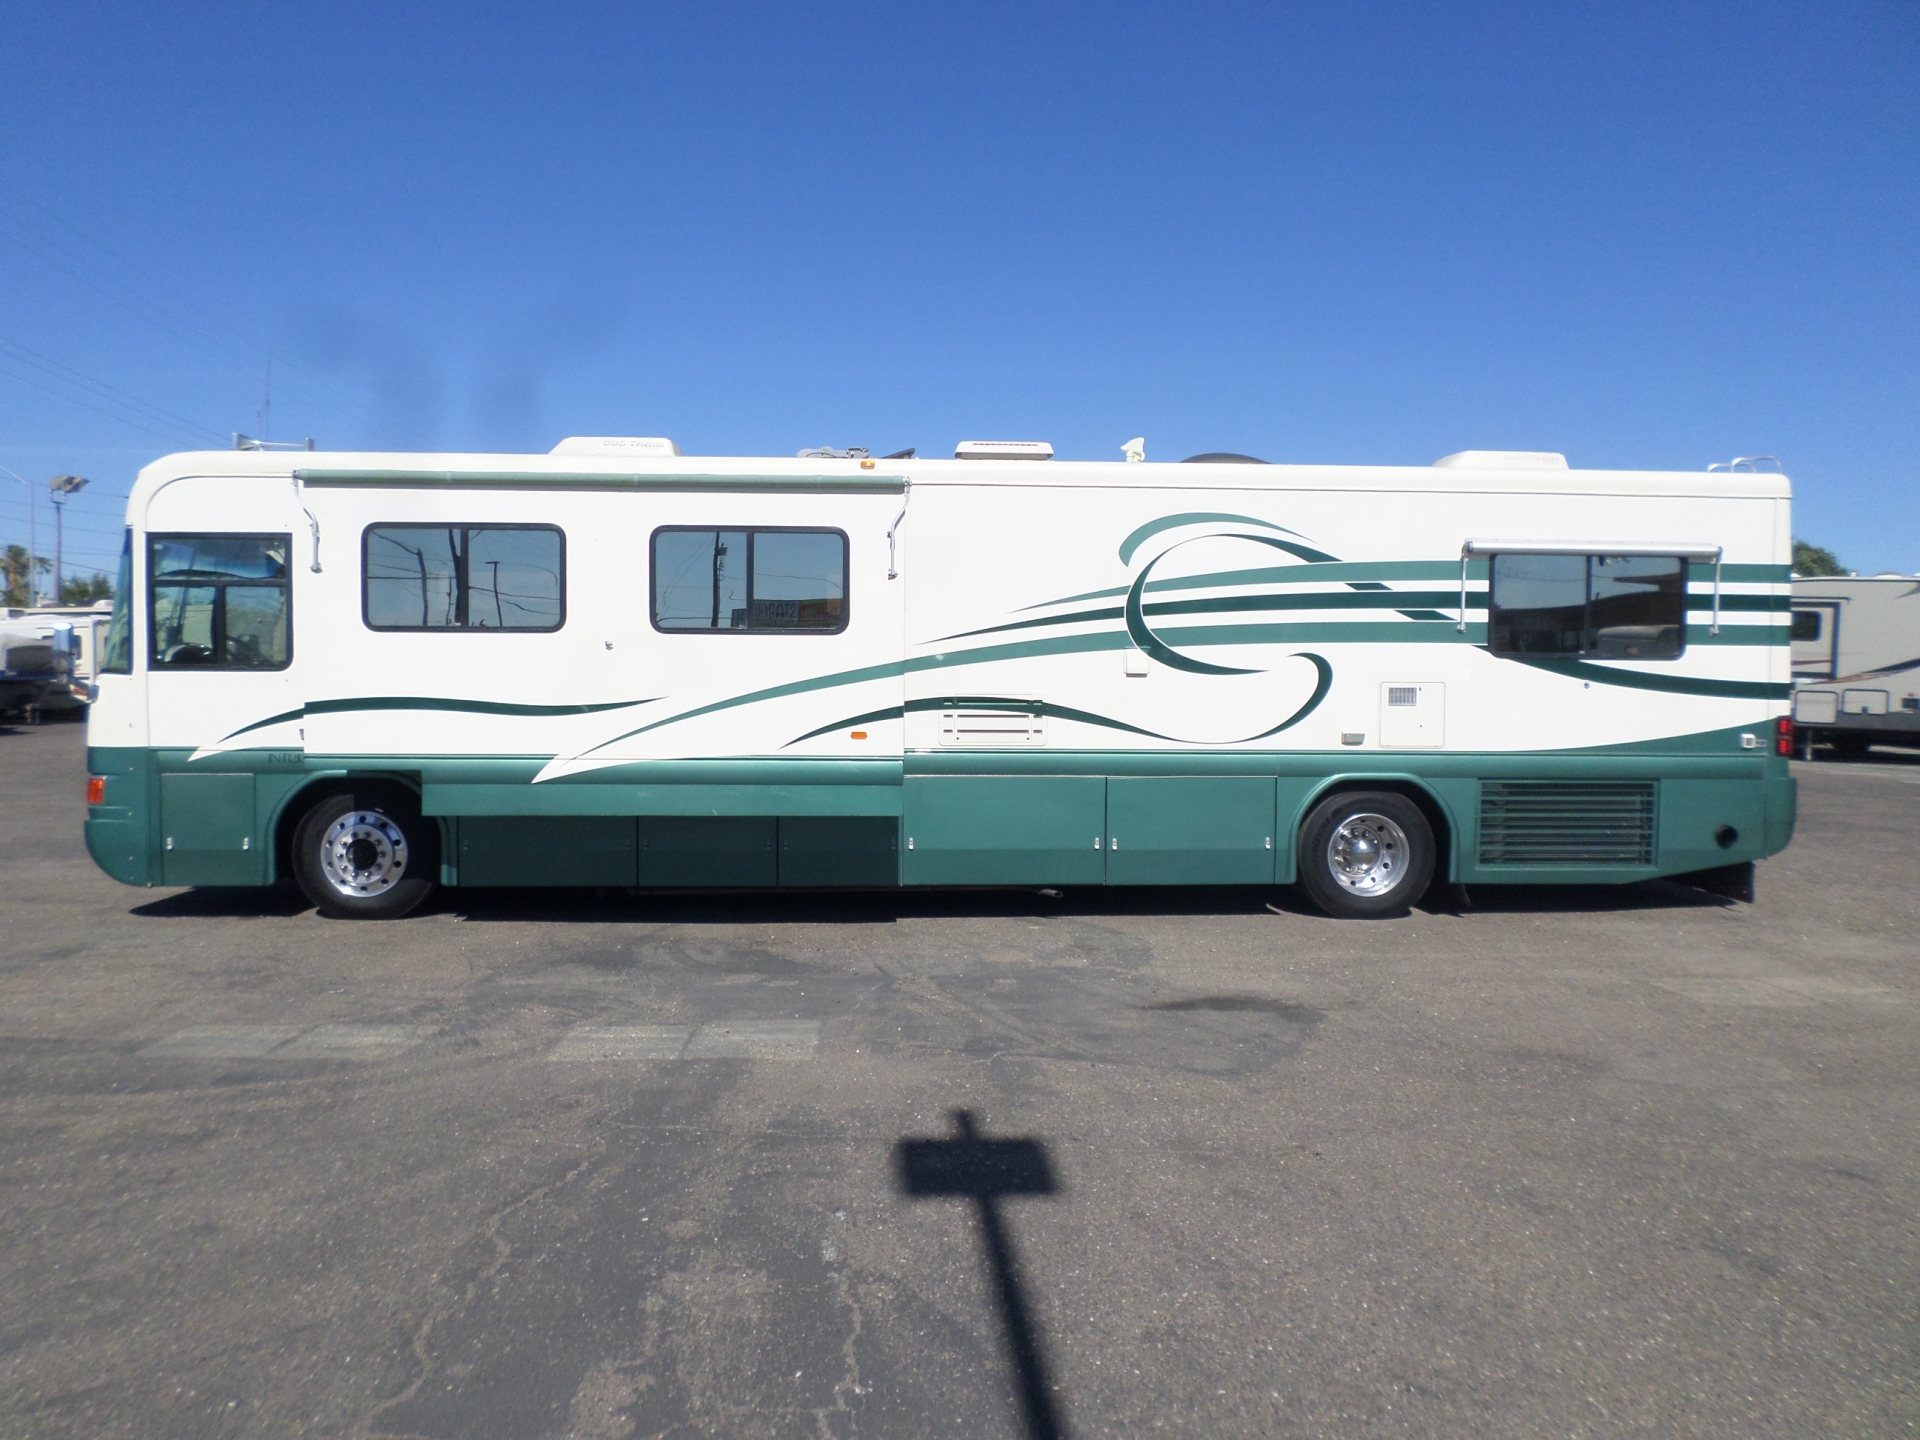 RV for sale: 1998 Country Coach Intrigue Diesel Pusher Motor Home 40' in  Lodi Stockton CA - Lodi Park and Sell